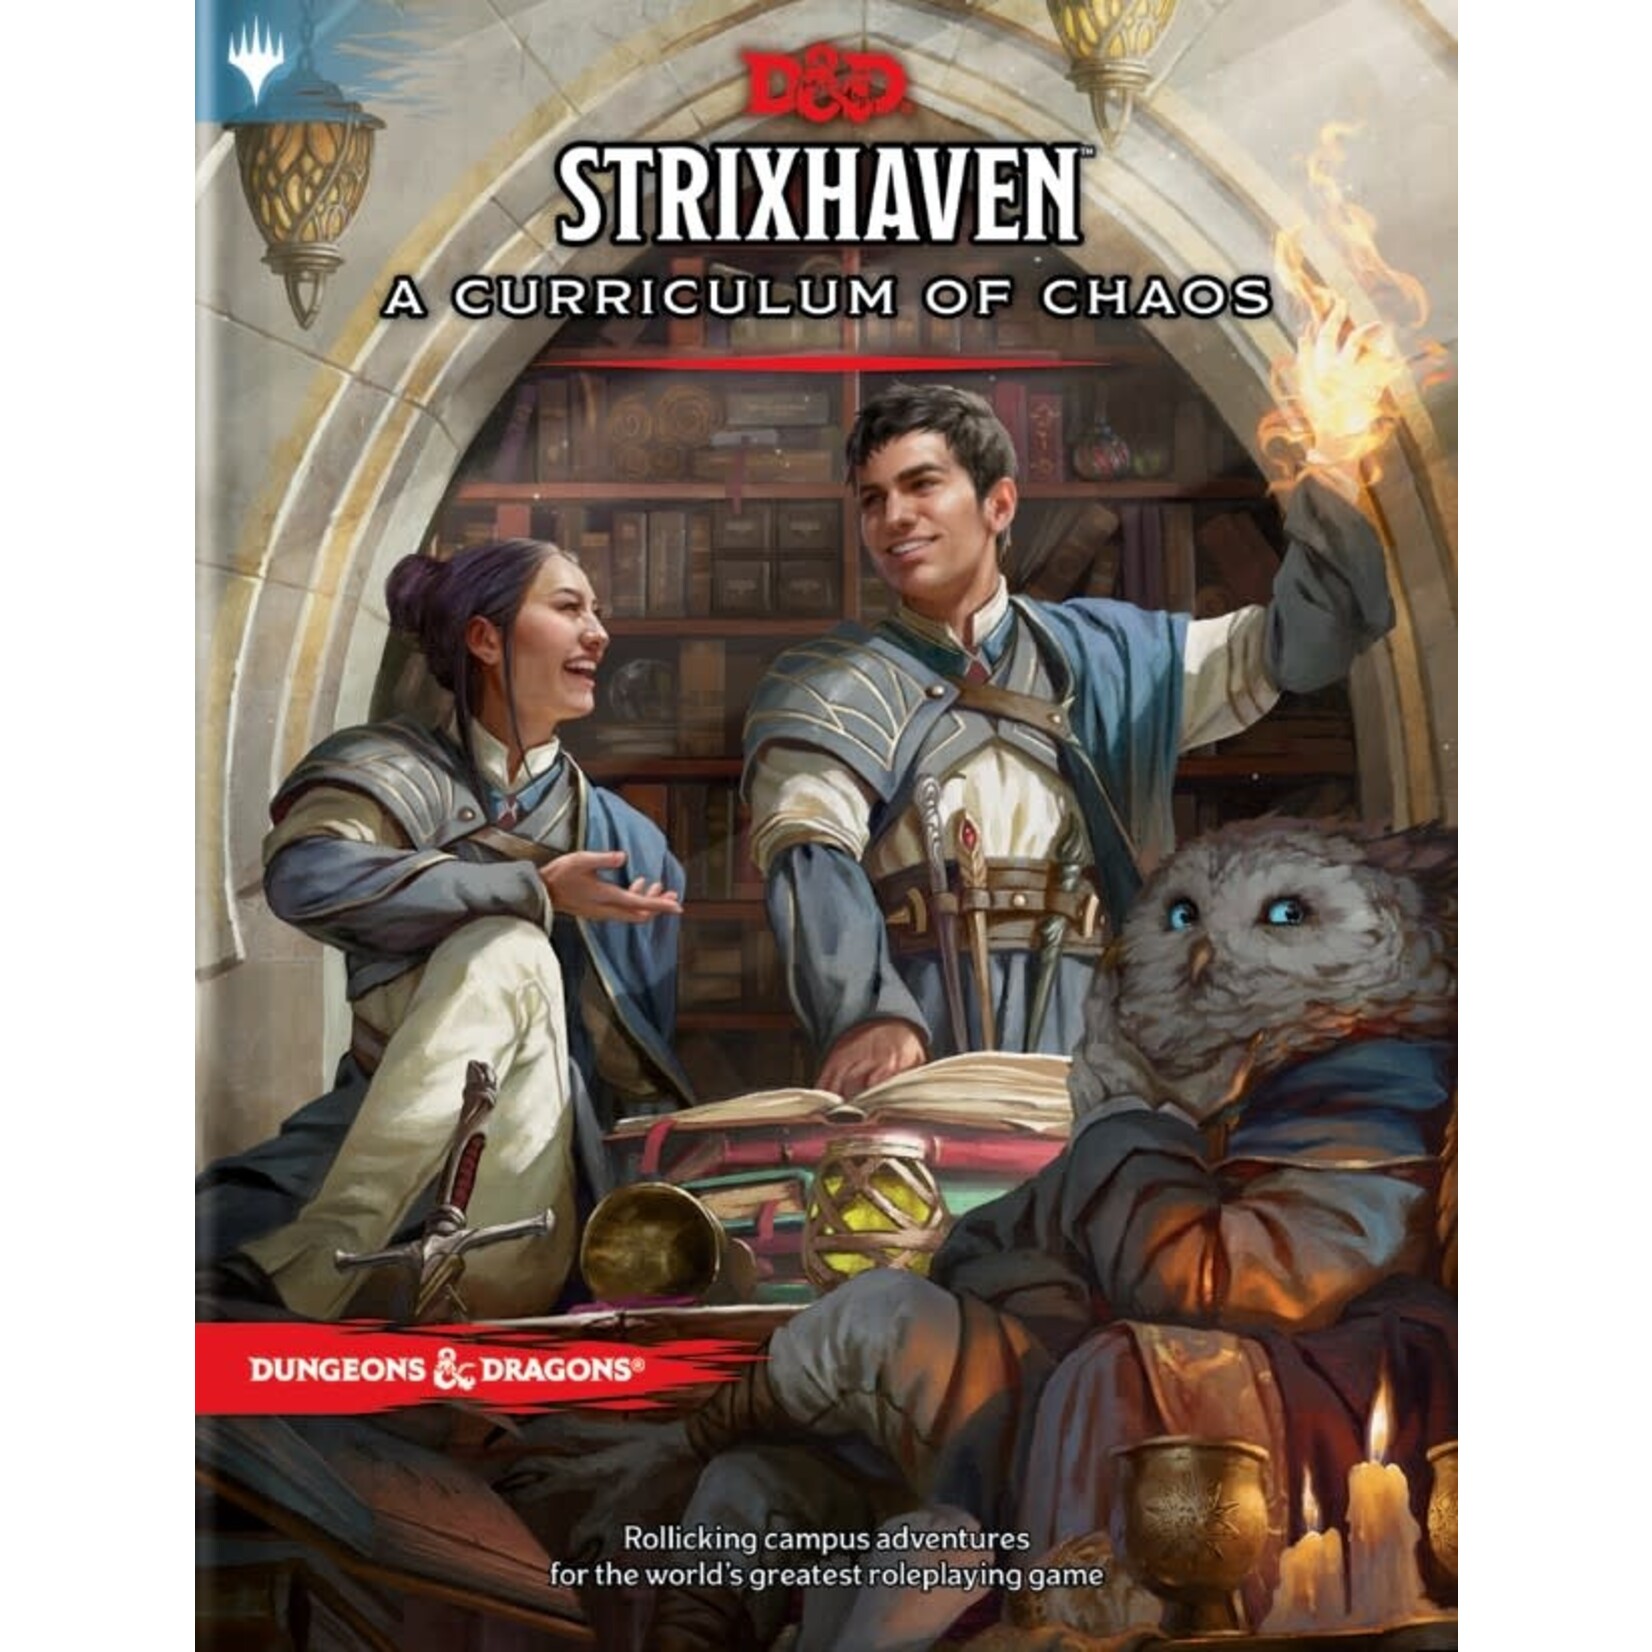 Dungeons & Dragons D&D 5th Edition: Strixhaven - Curriculum of Chaos